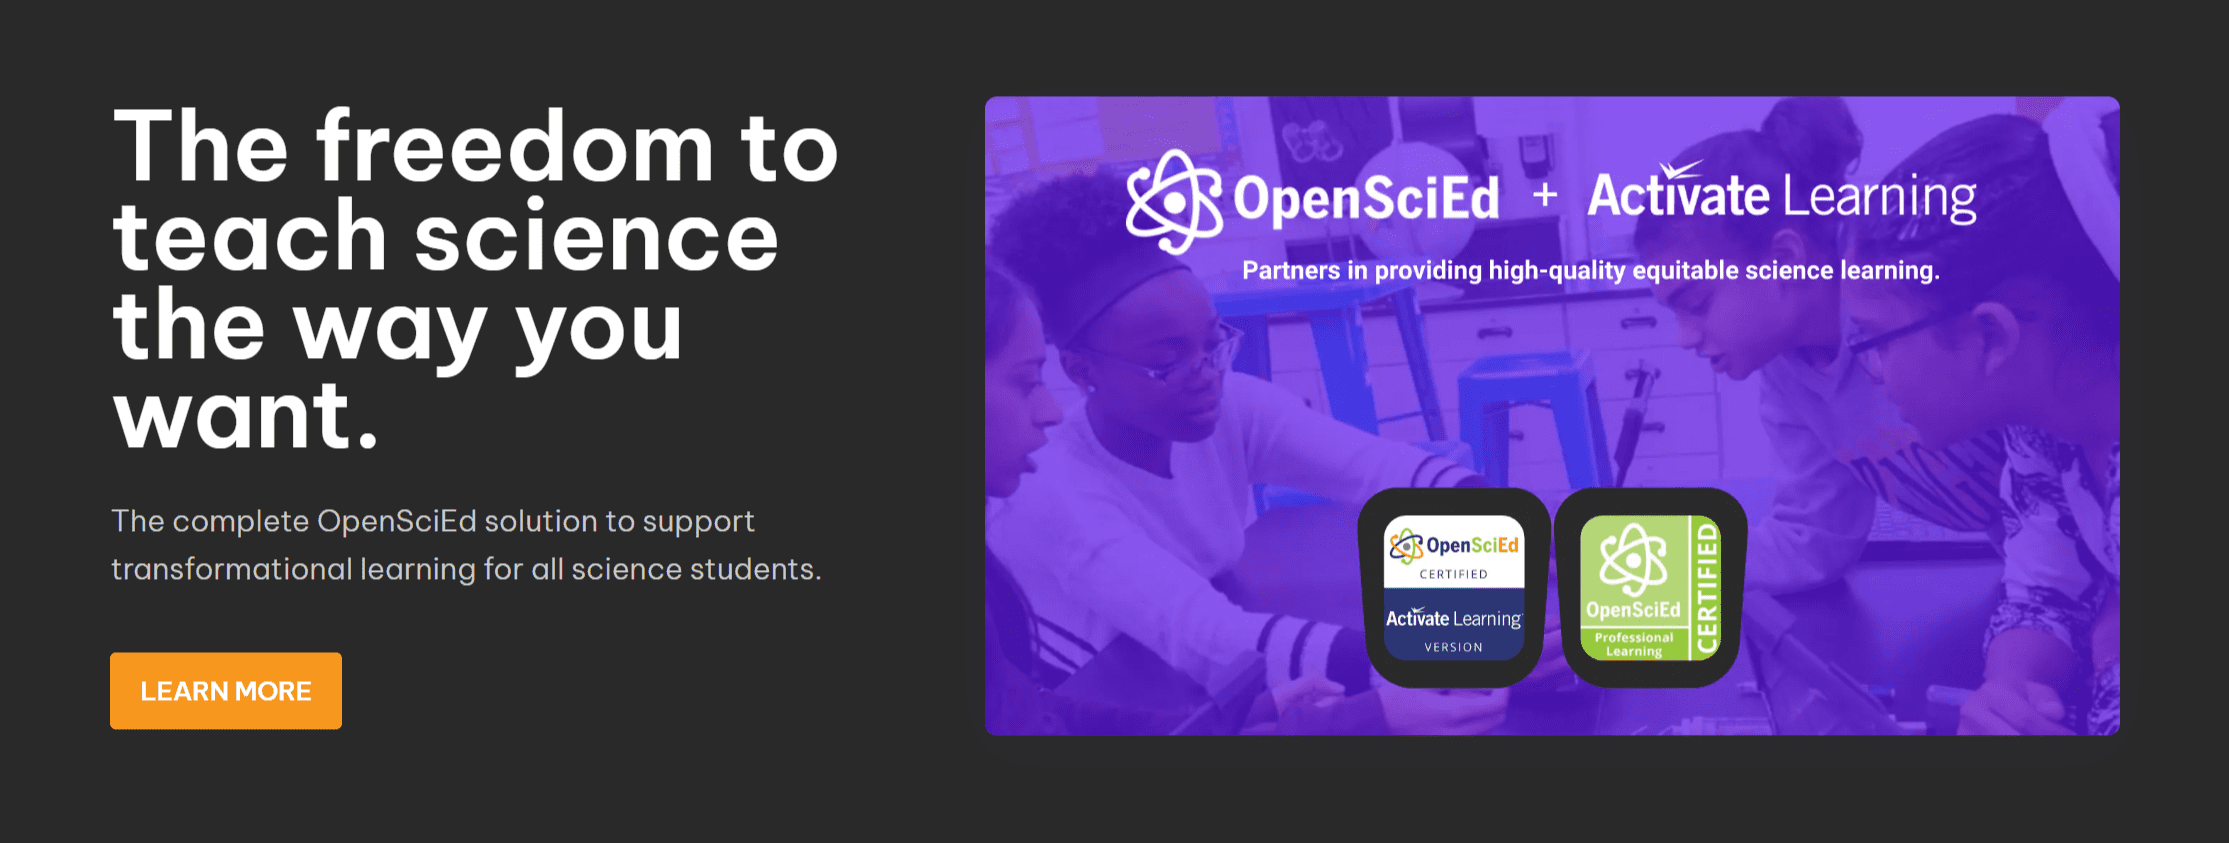 Call to Action - OpenSciEd